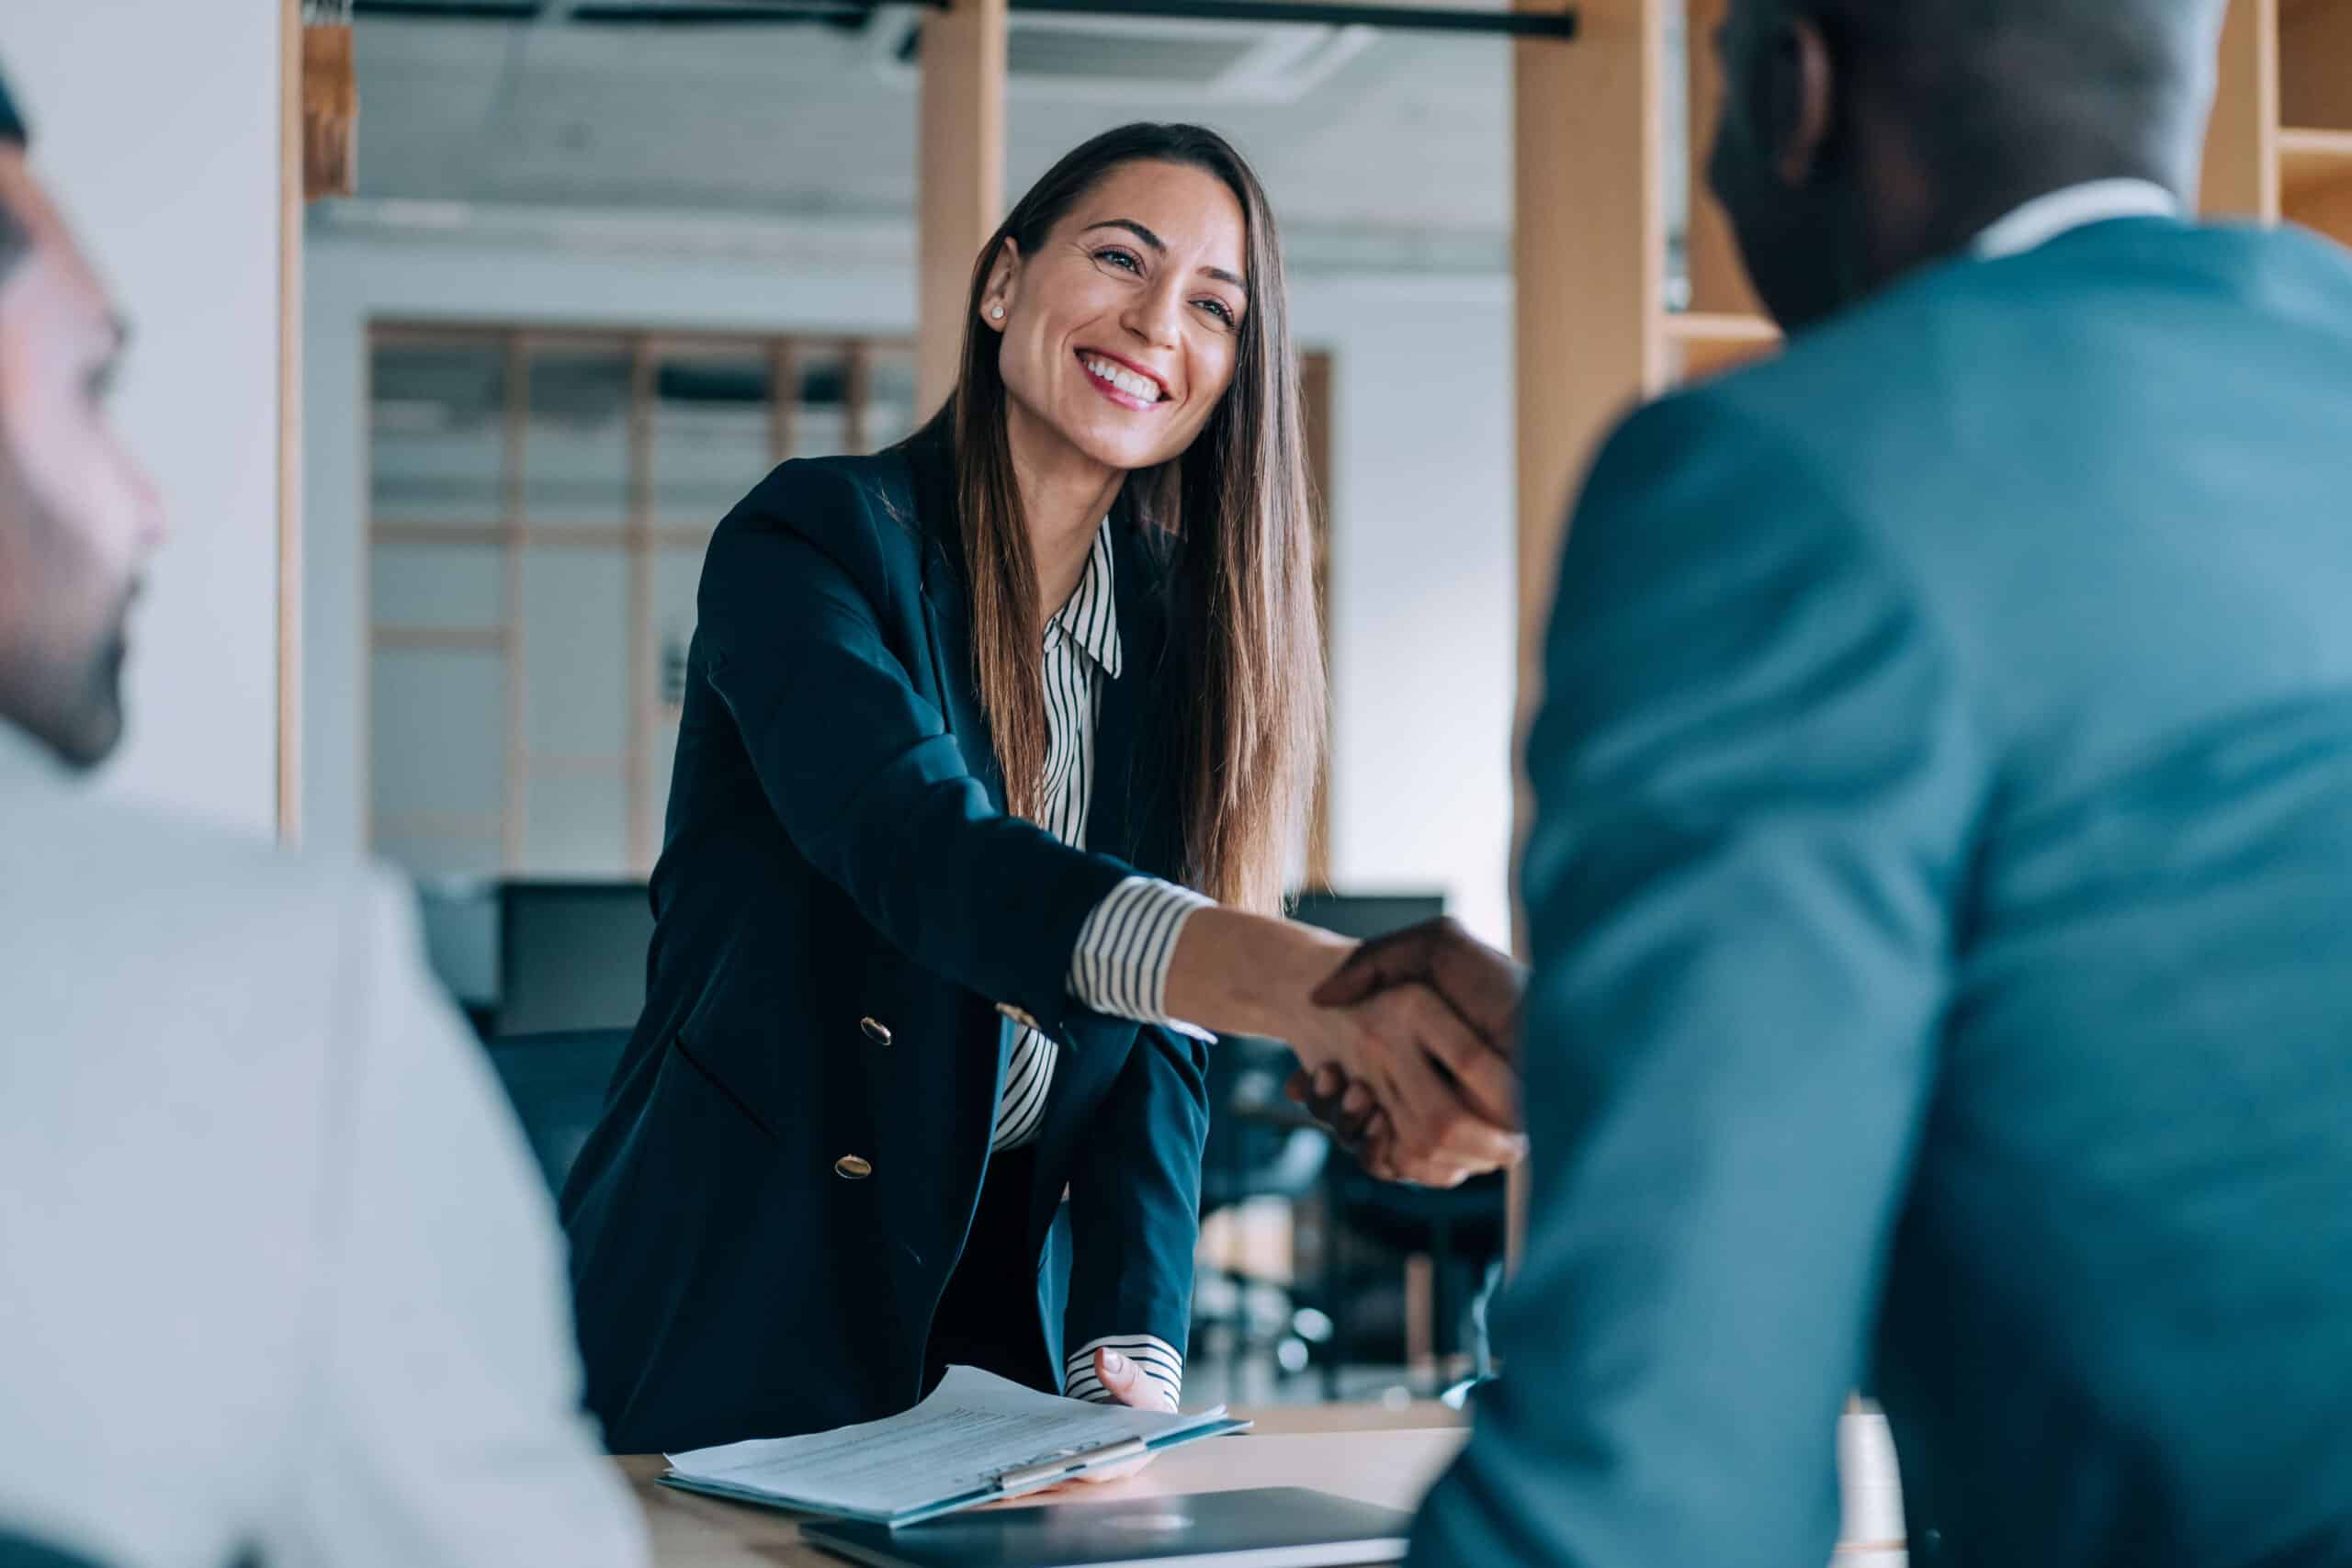 Professional woman smiling while shaking hands with man